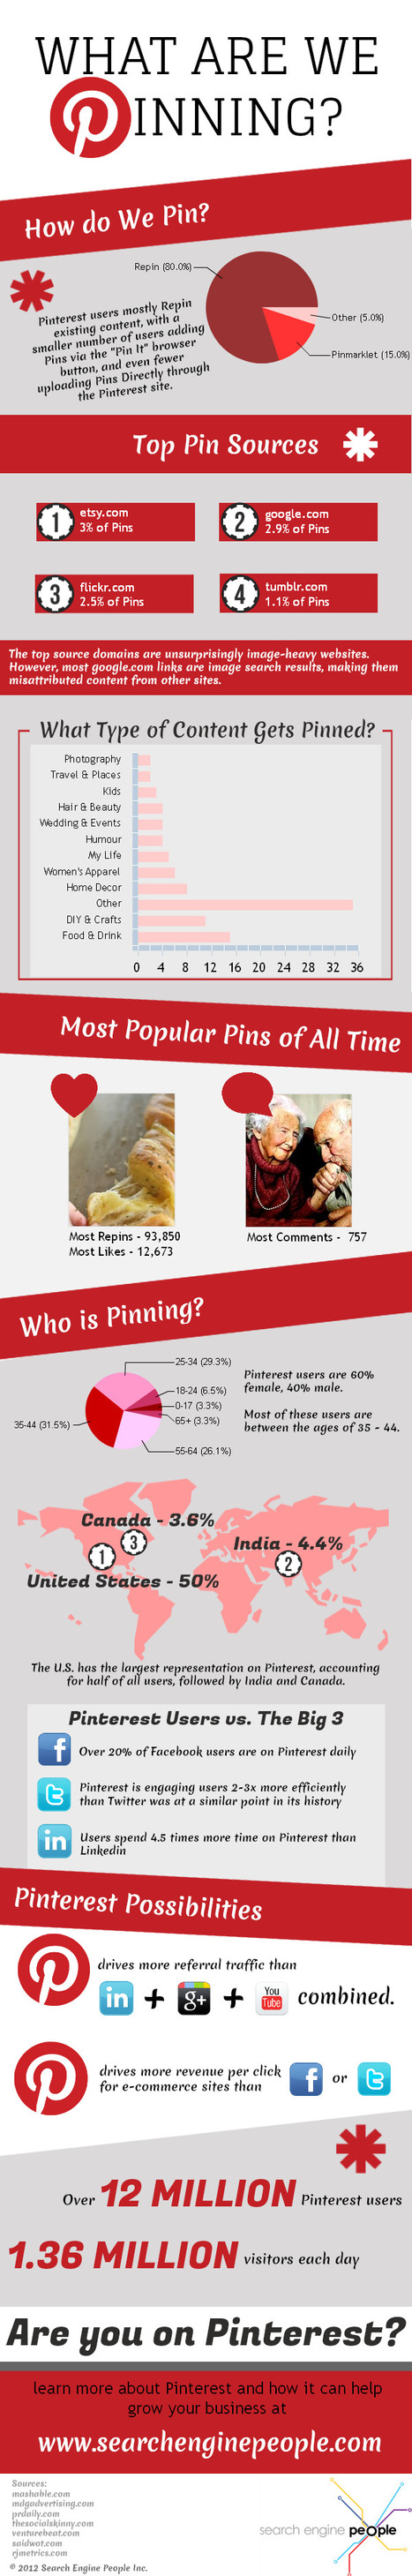 What Are We Pinning? [Infographic] | Digital Collaboration and the 21st C. | Scoop.it